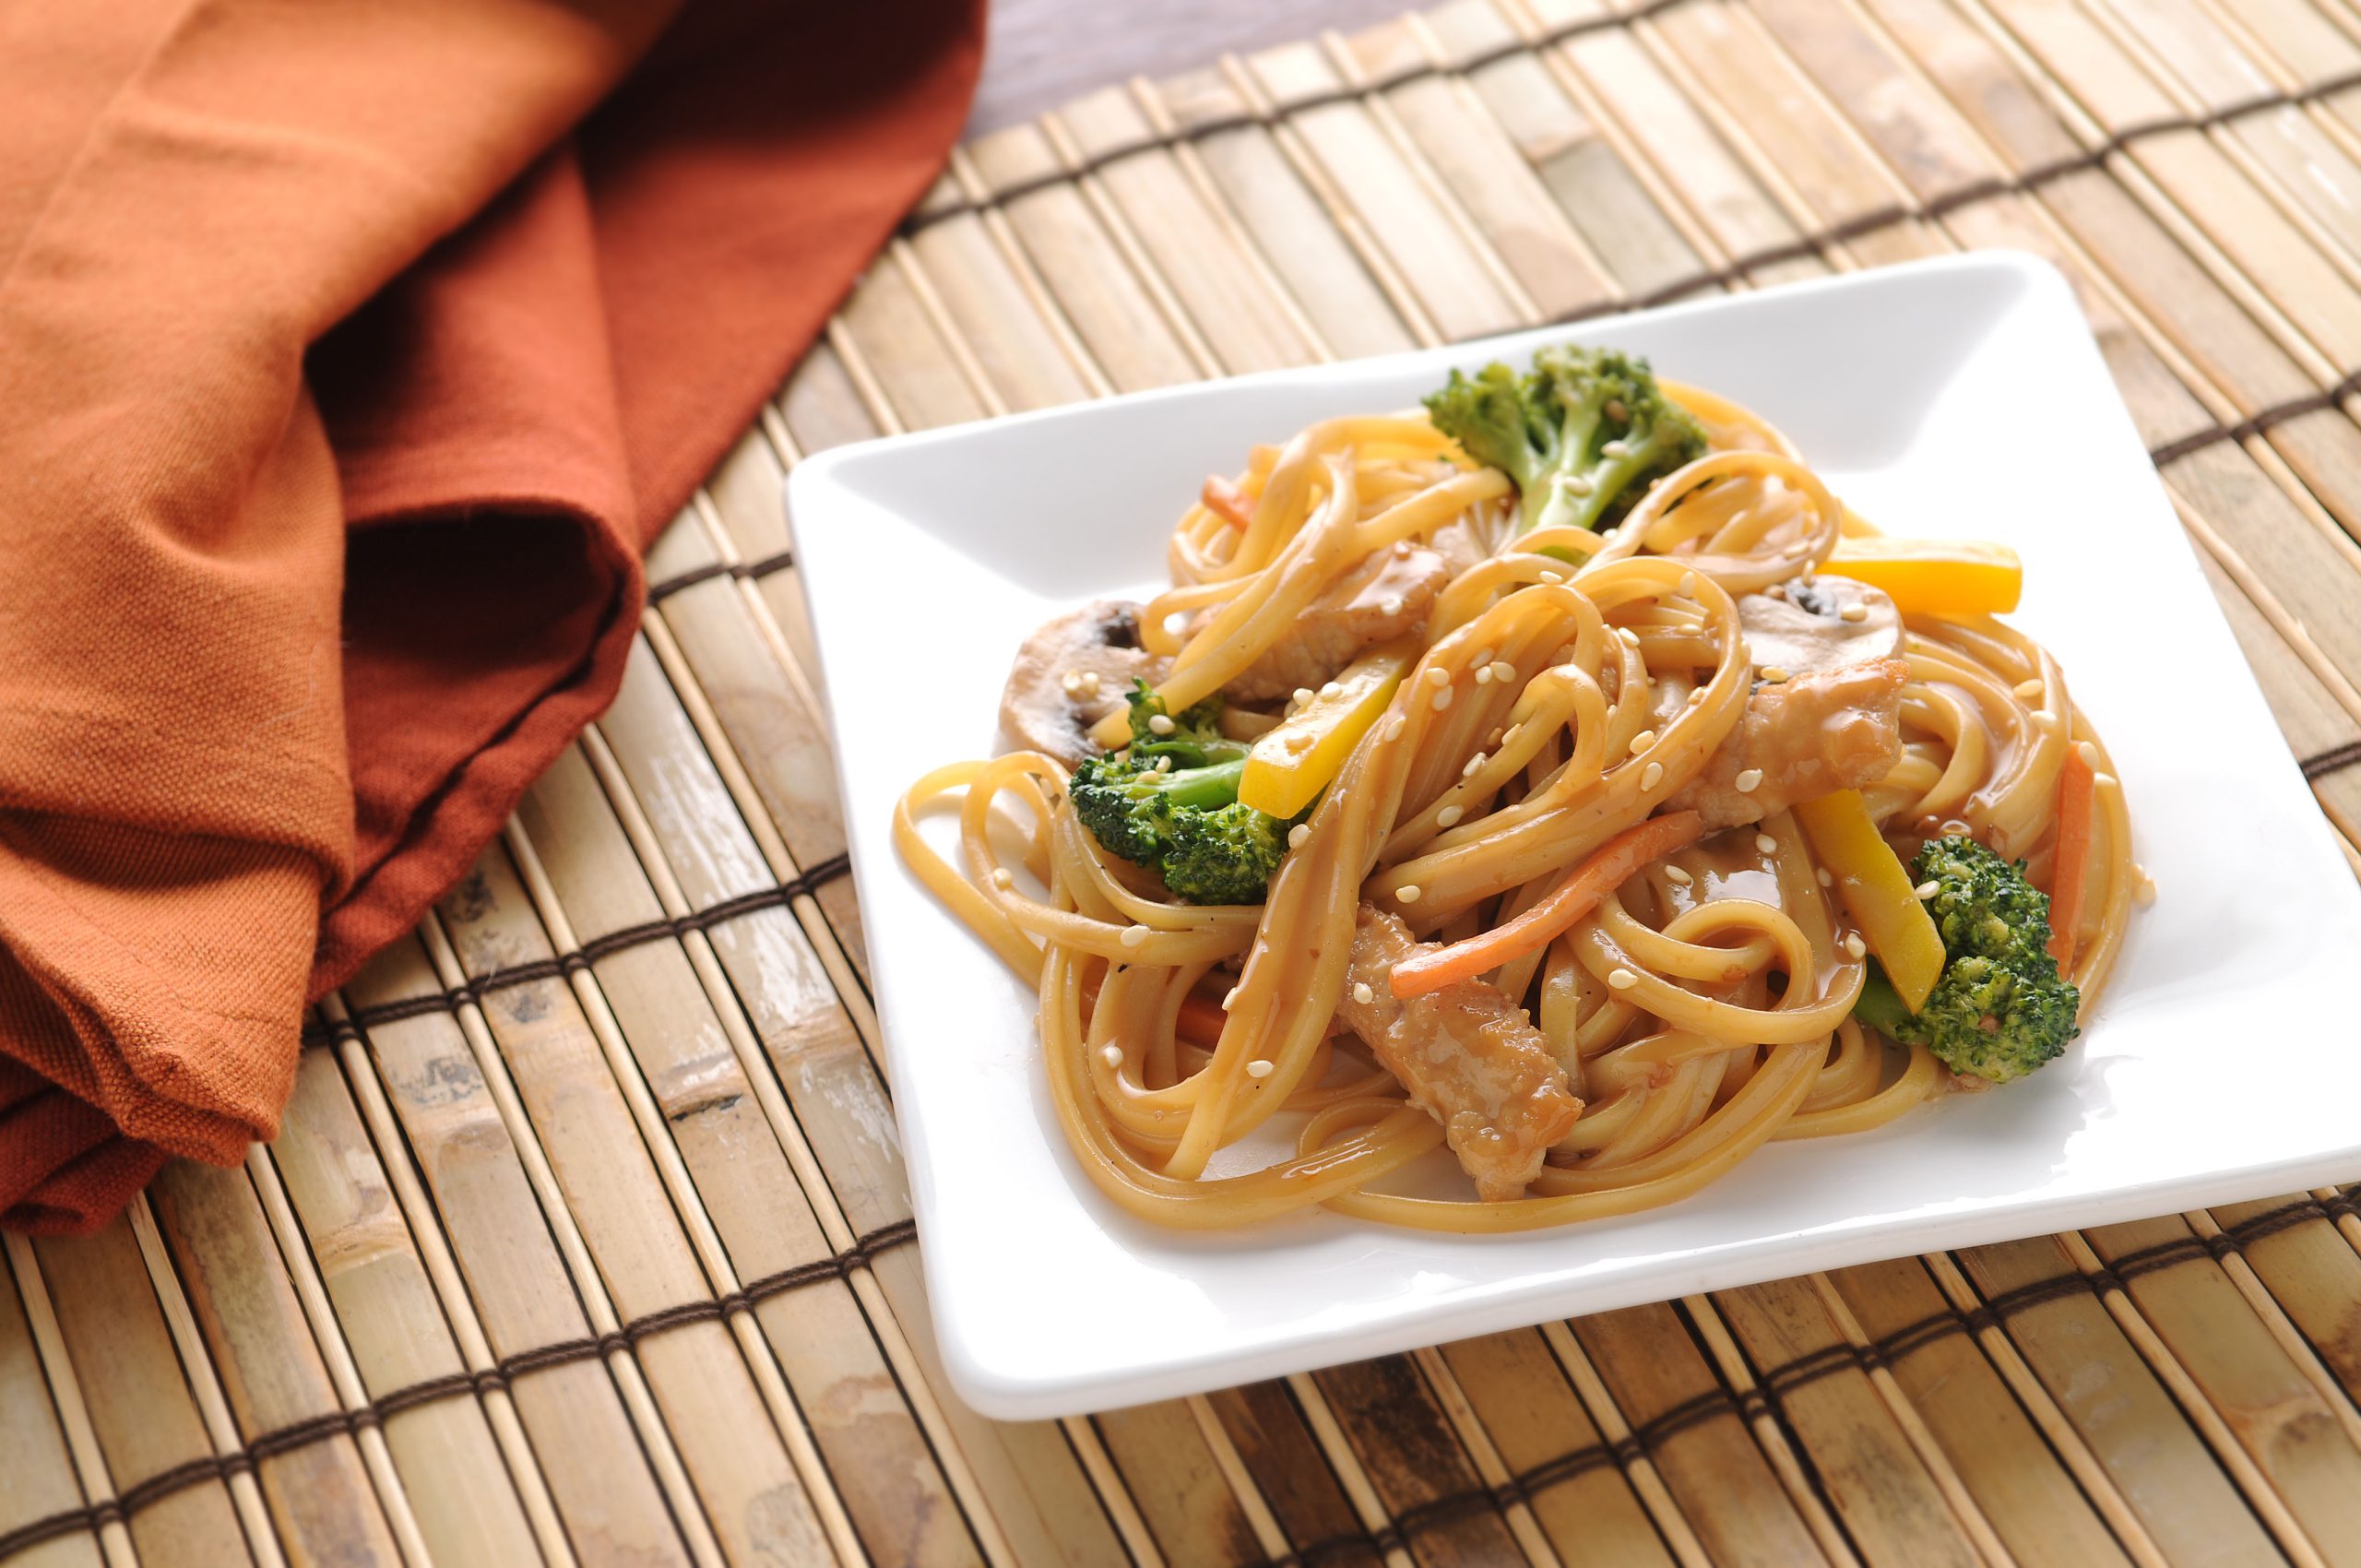 Linguine, pork, carrots, and broccoli coated in an Asian vinaigrette and topped with sesame seeds